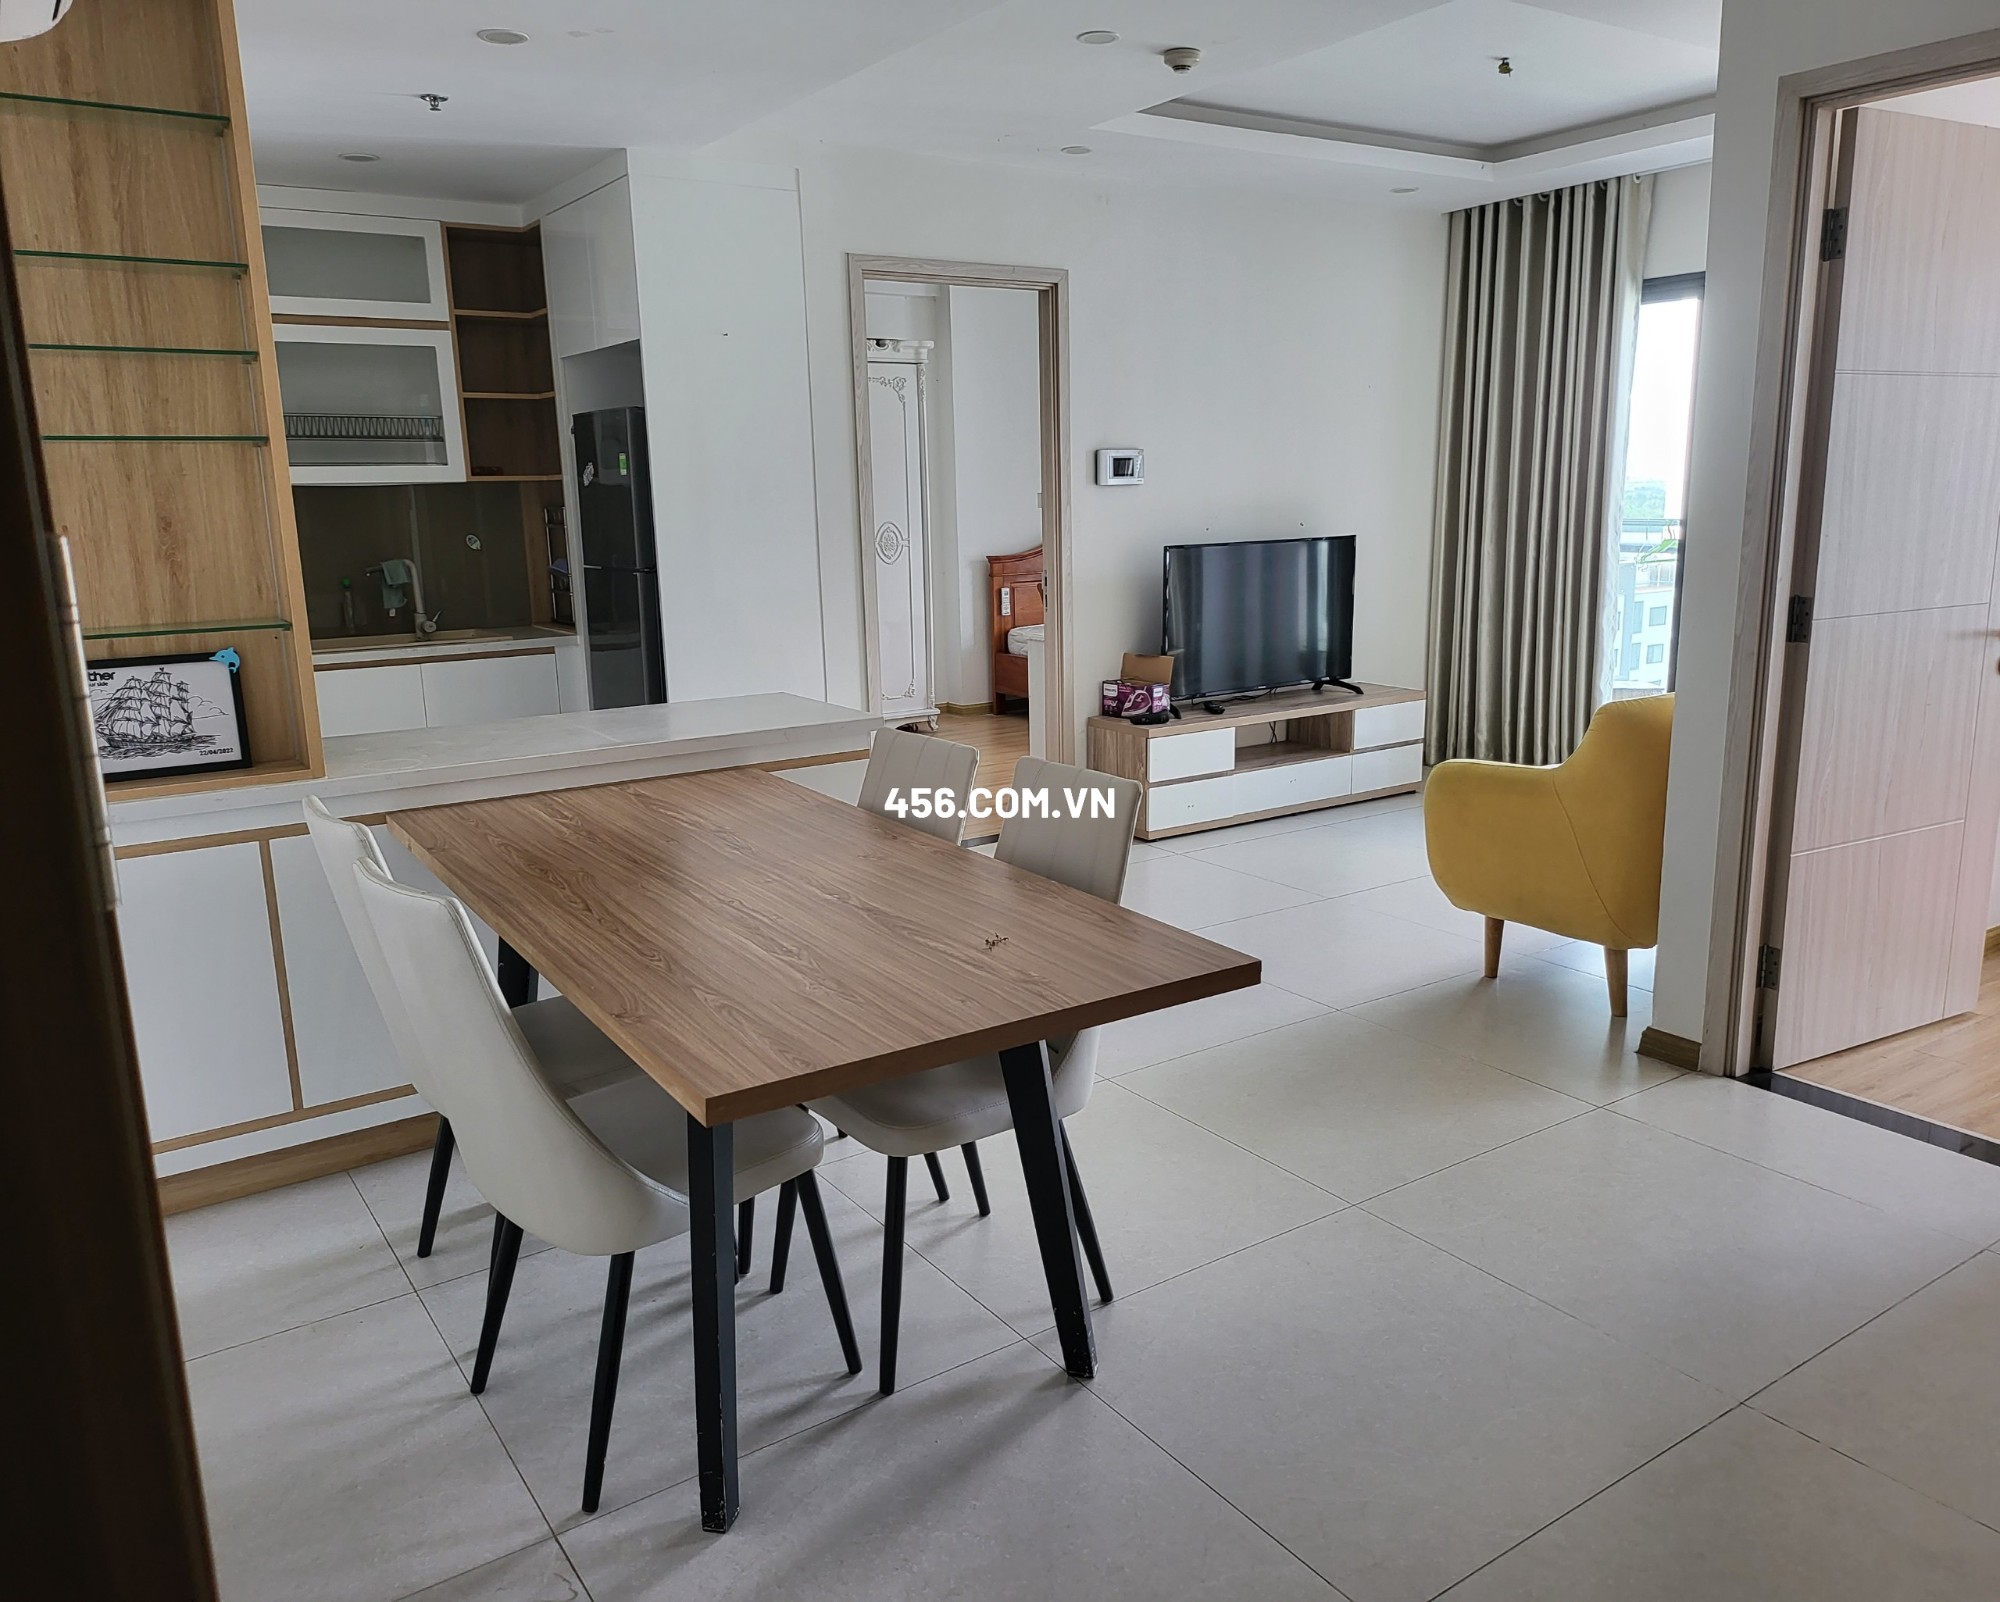 3 Bedrooms New City Thu Thiem Apartment For...